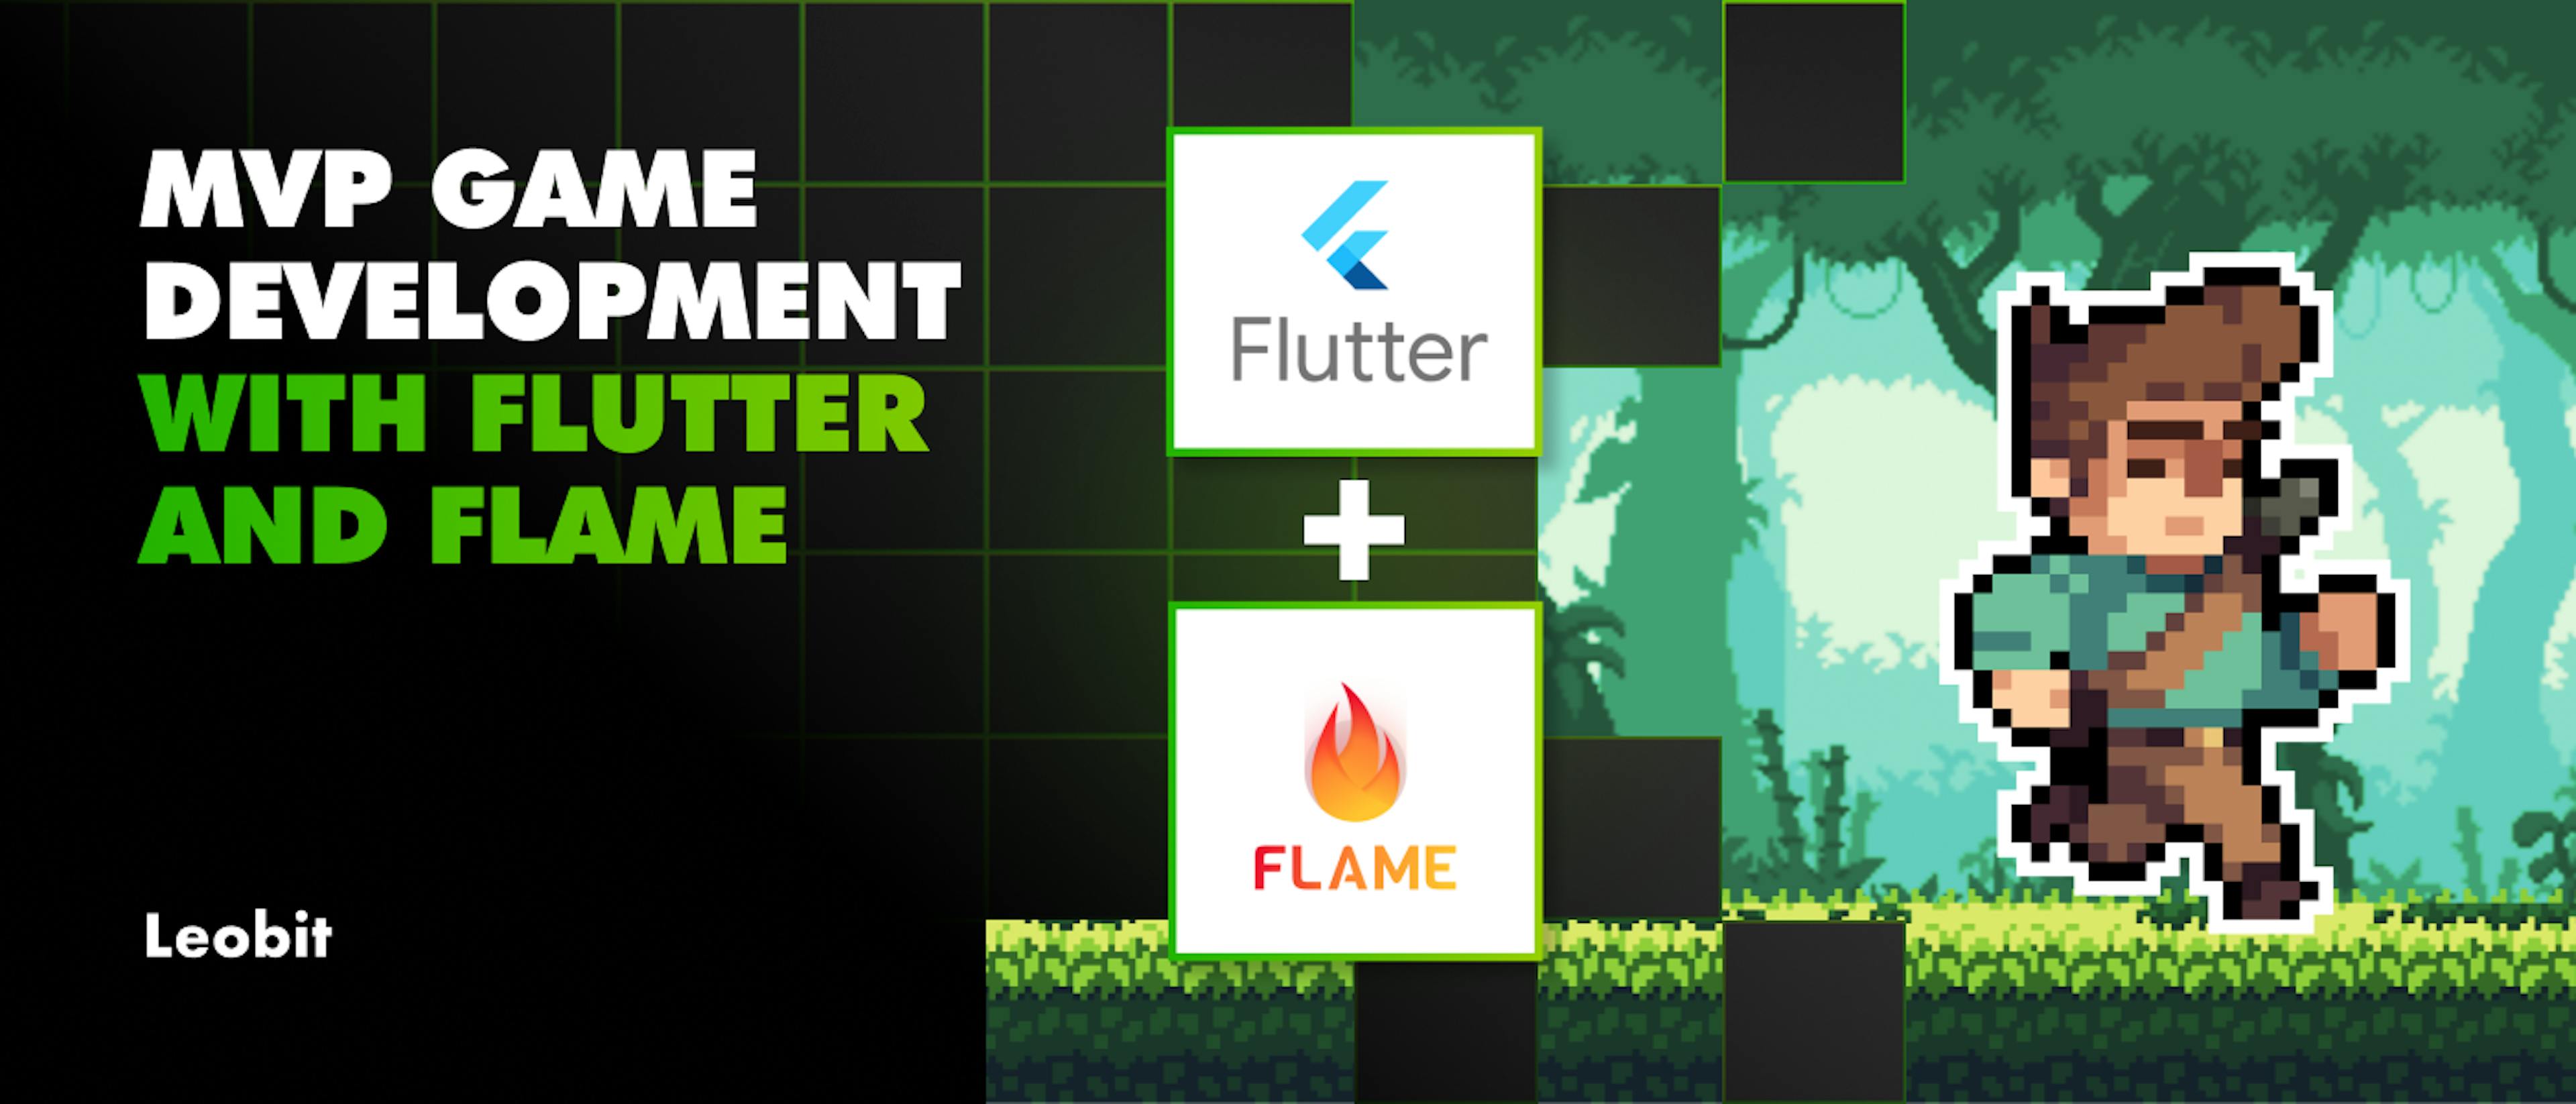 featured image - MVP Game Development With Flutter and Flame